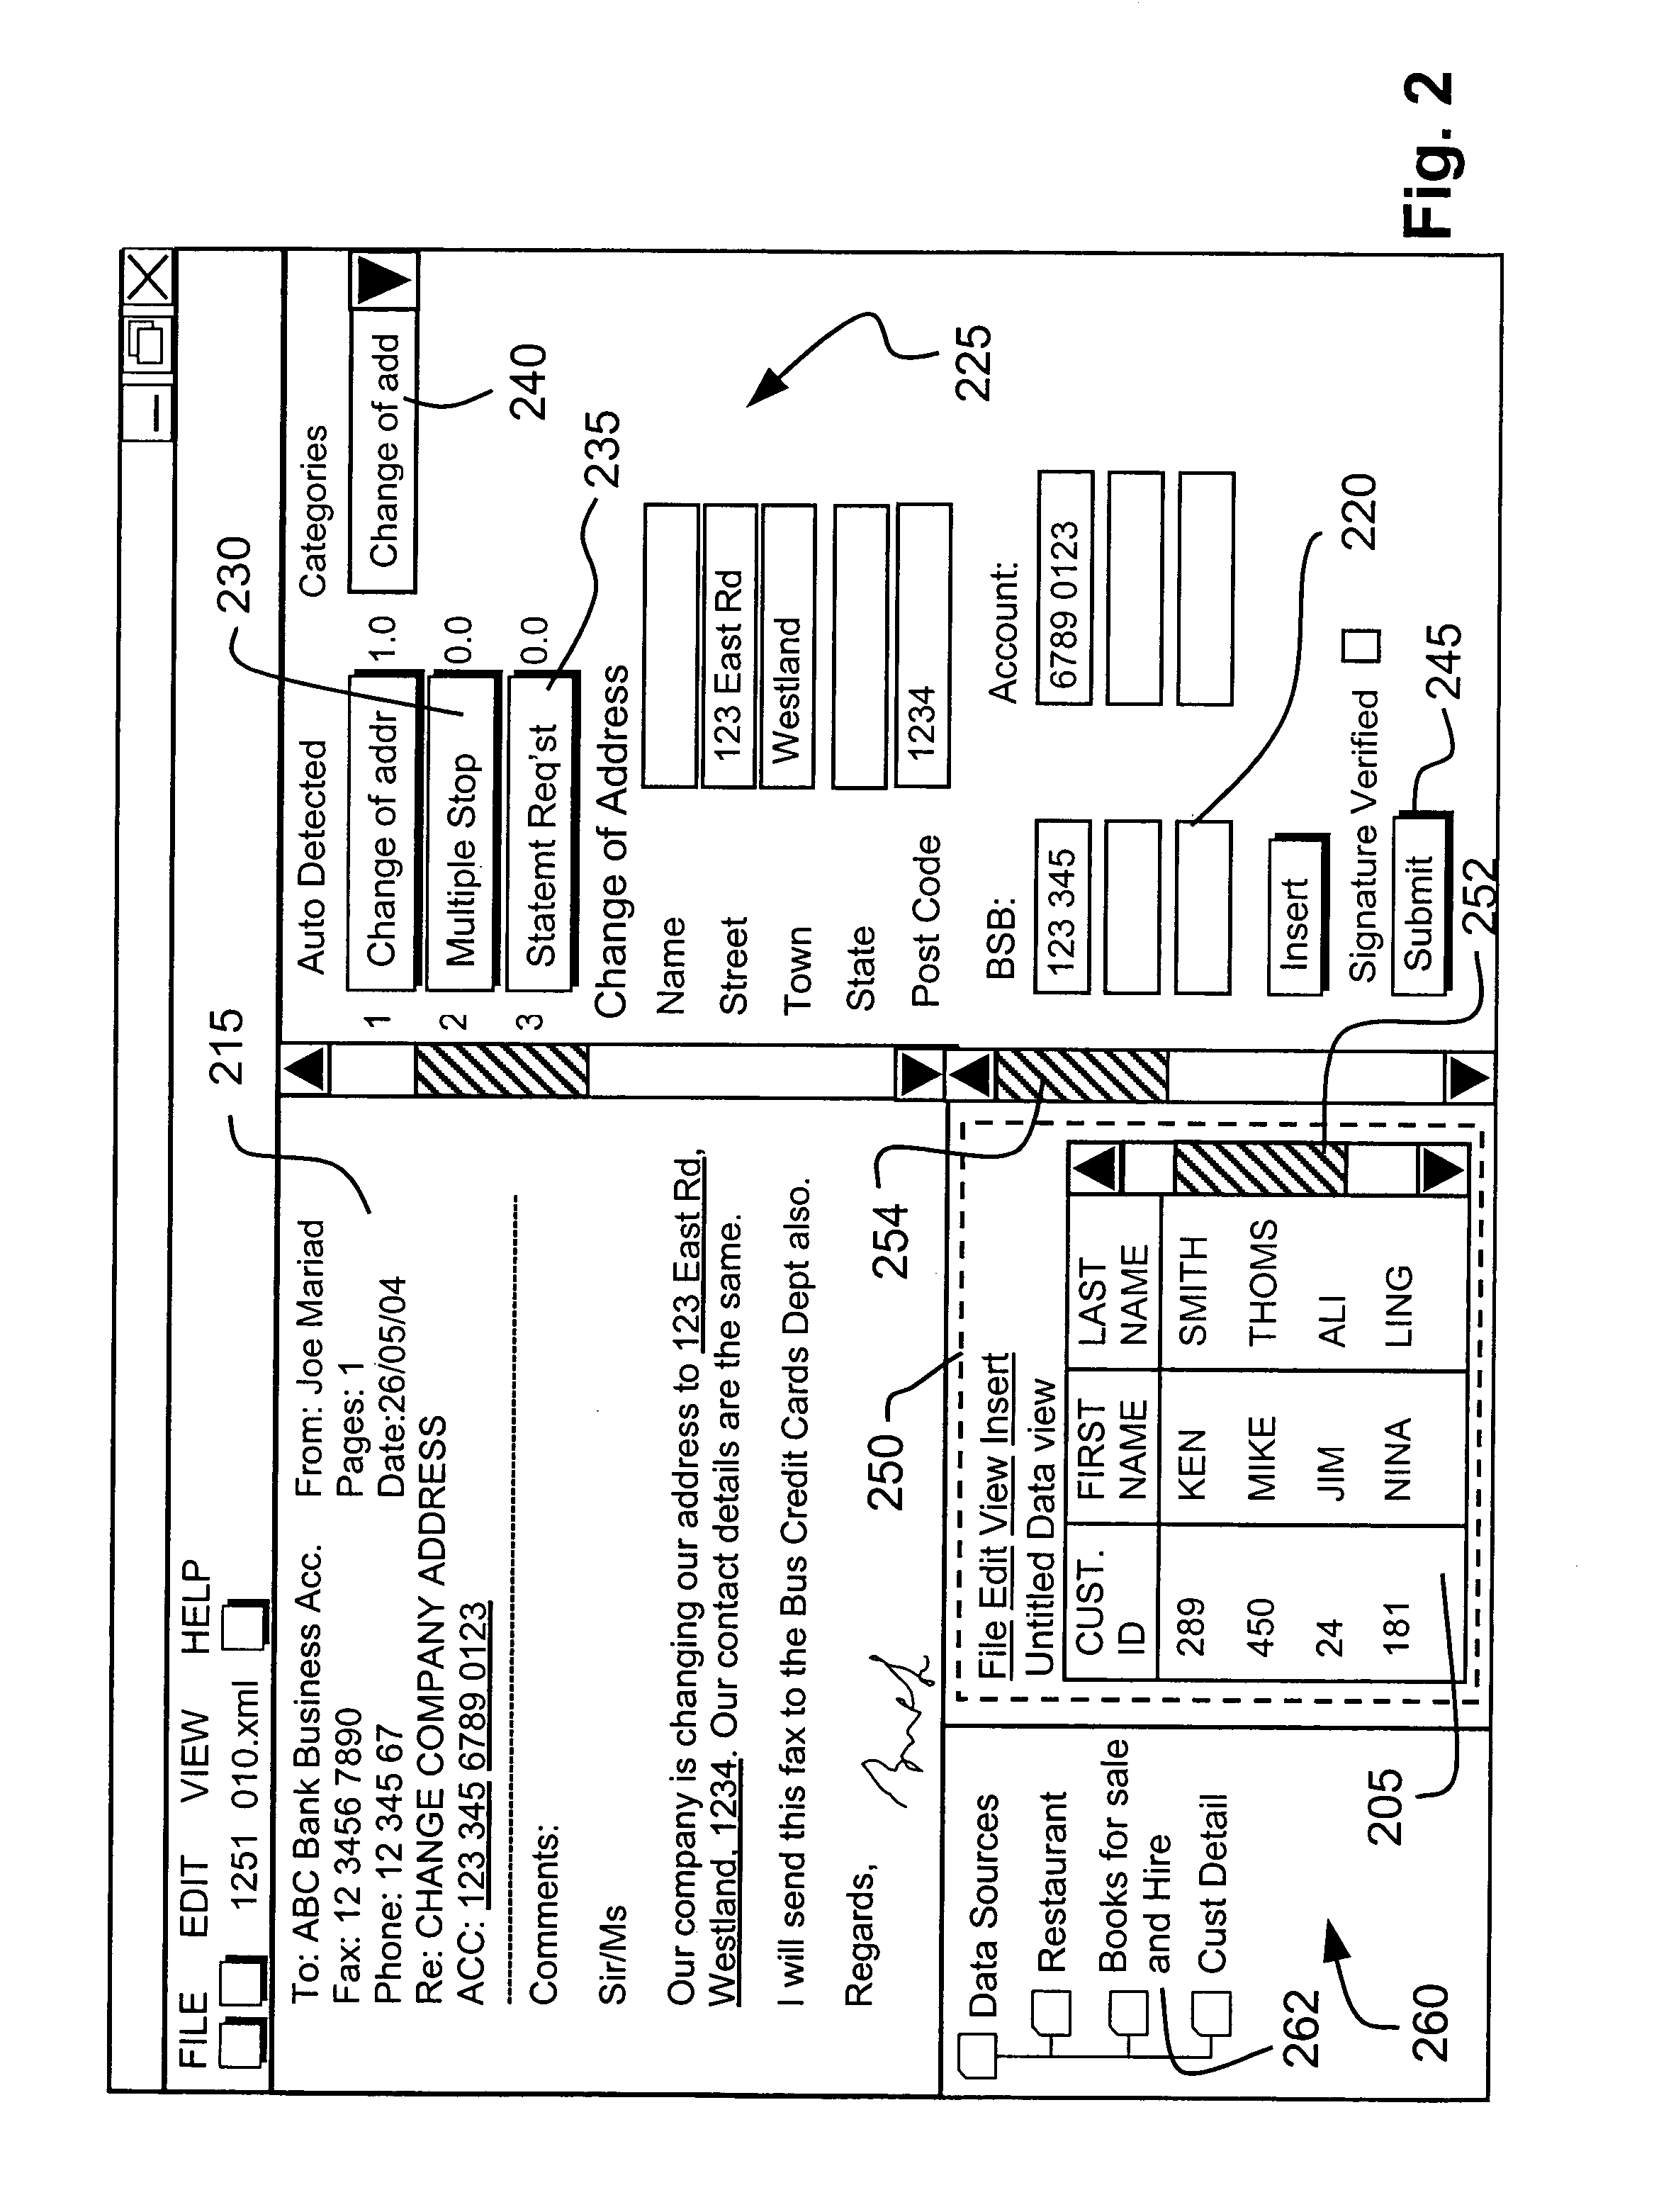 Method of learning associations between documents and data sets